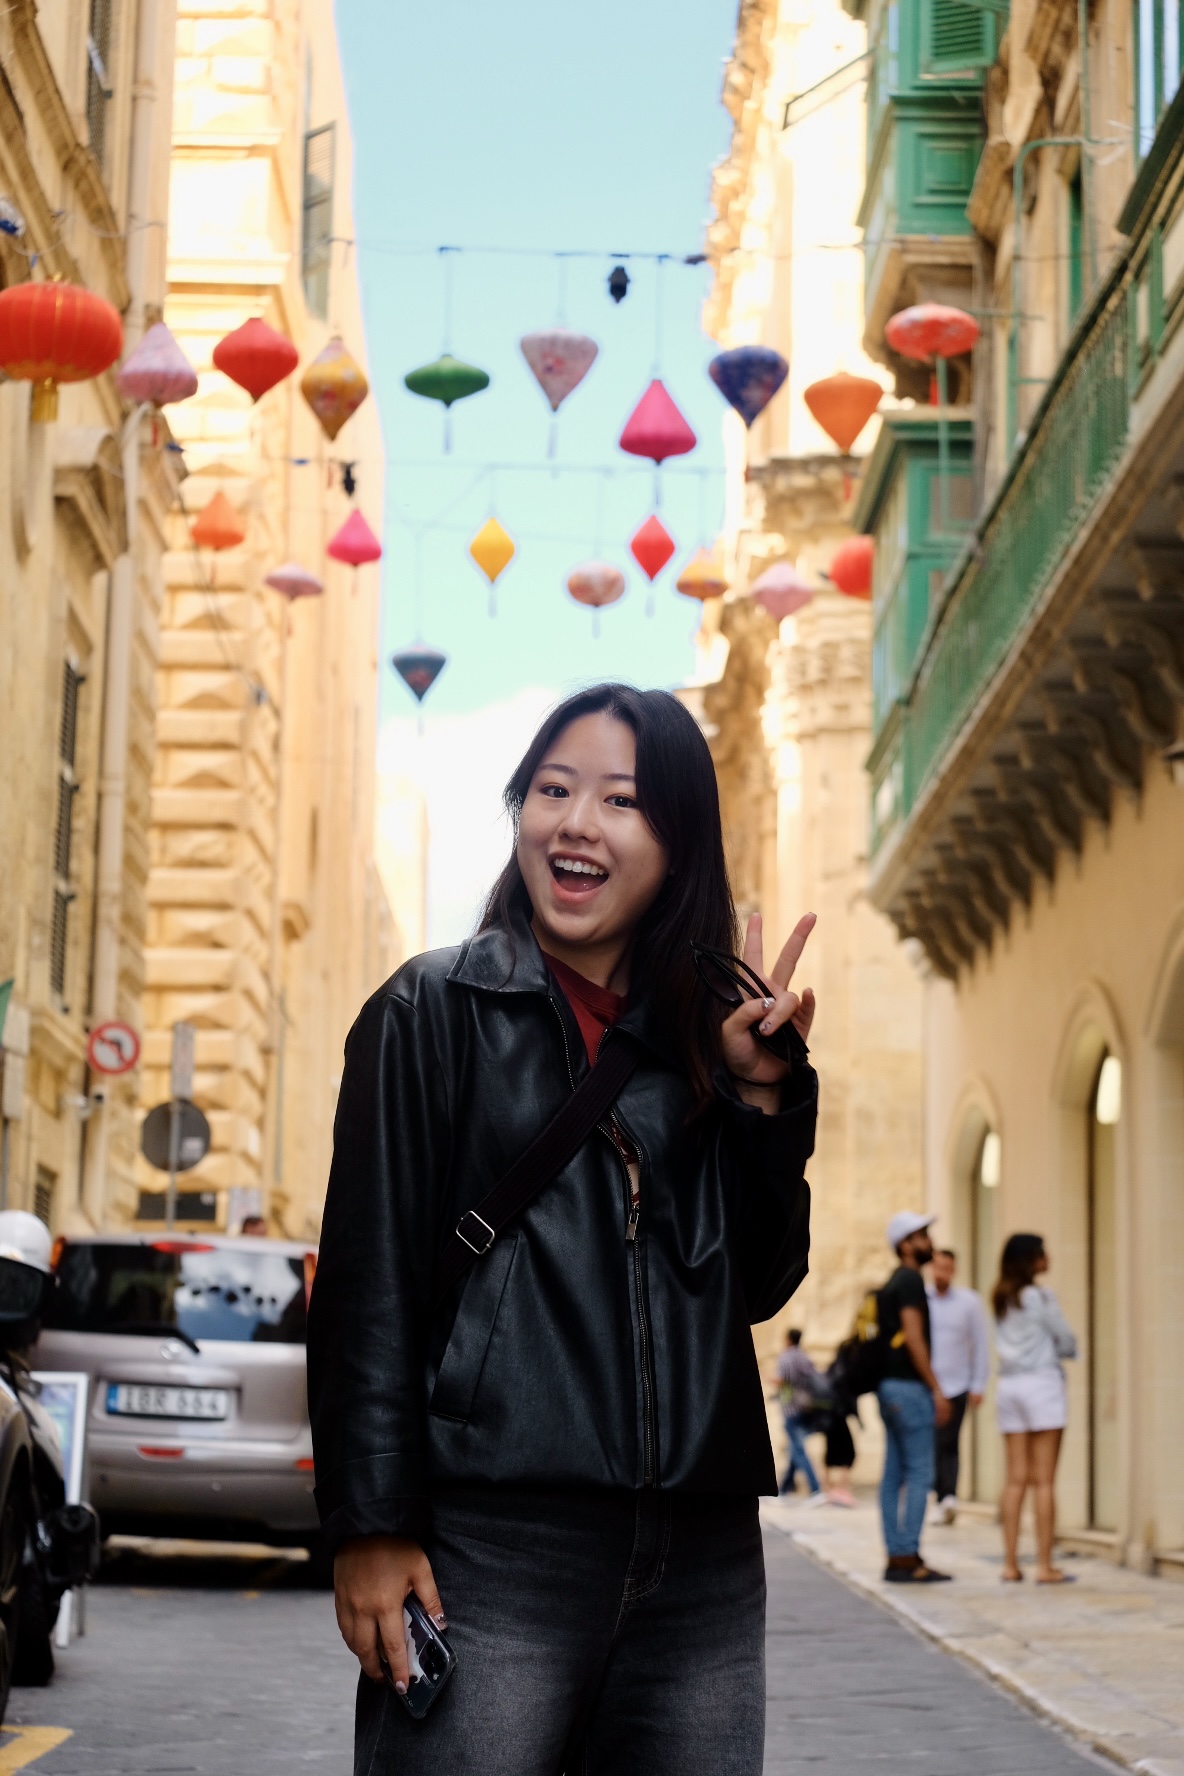 Celebrating OpportunitIES Abroad with our AAPI Correspondents [Video]